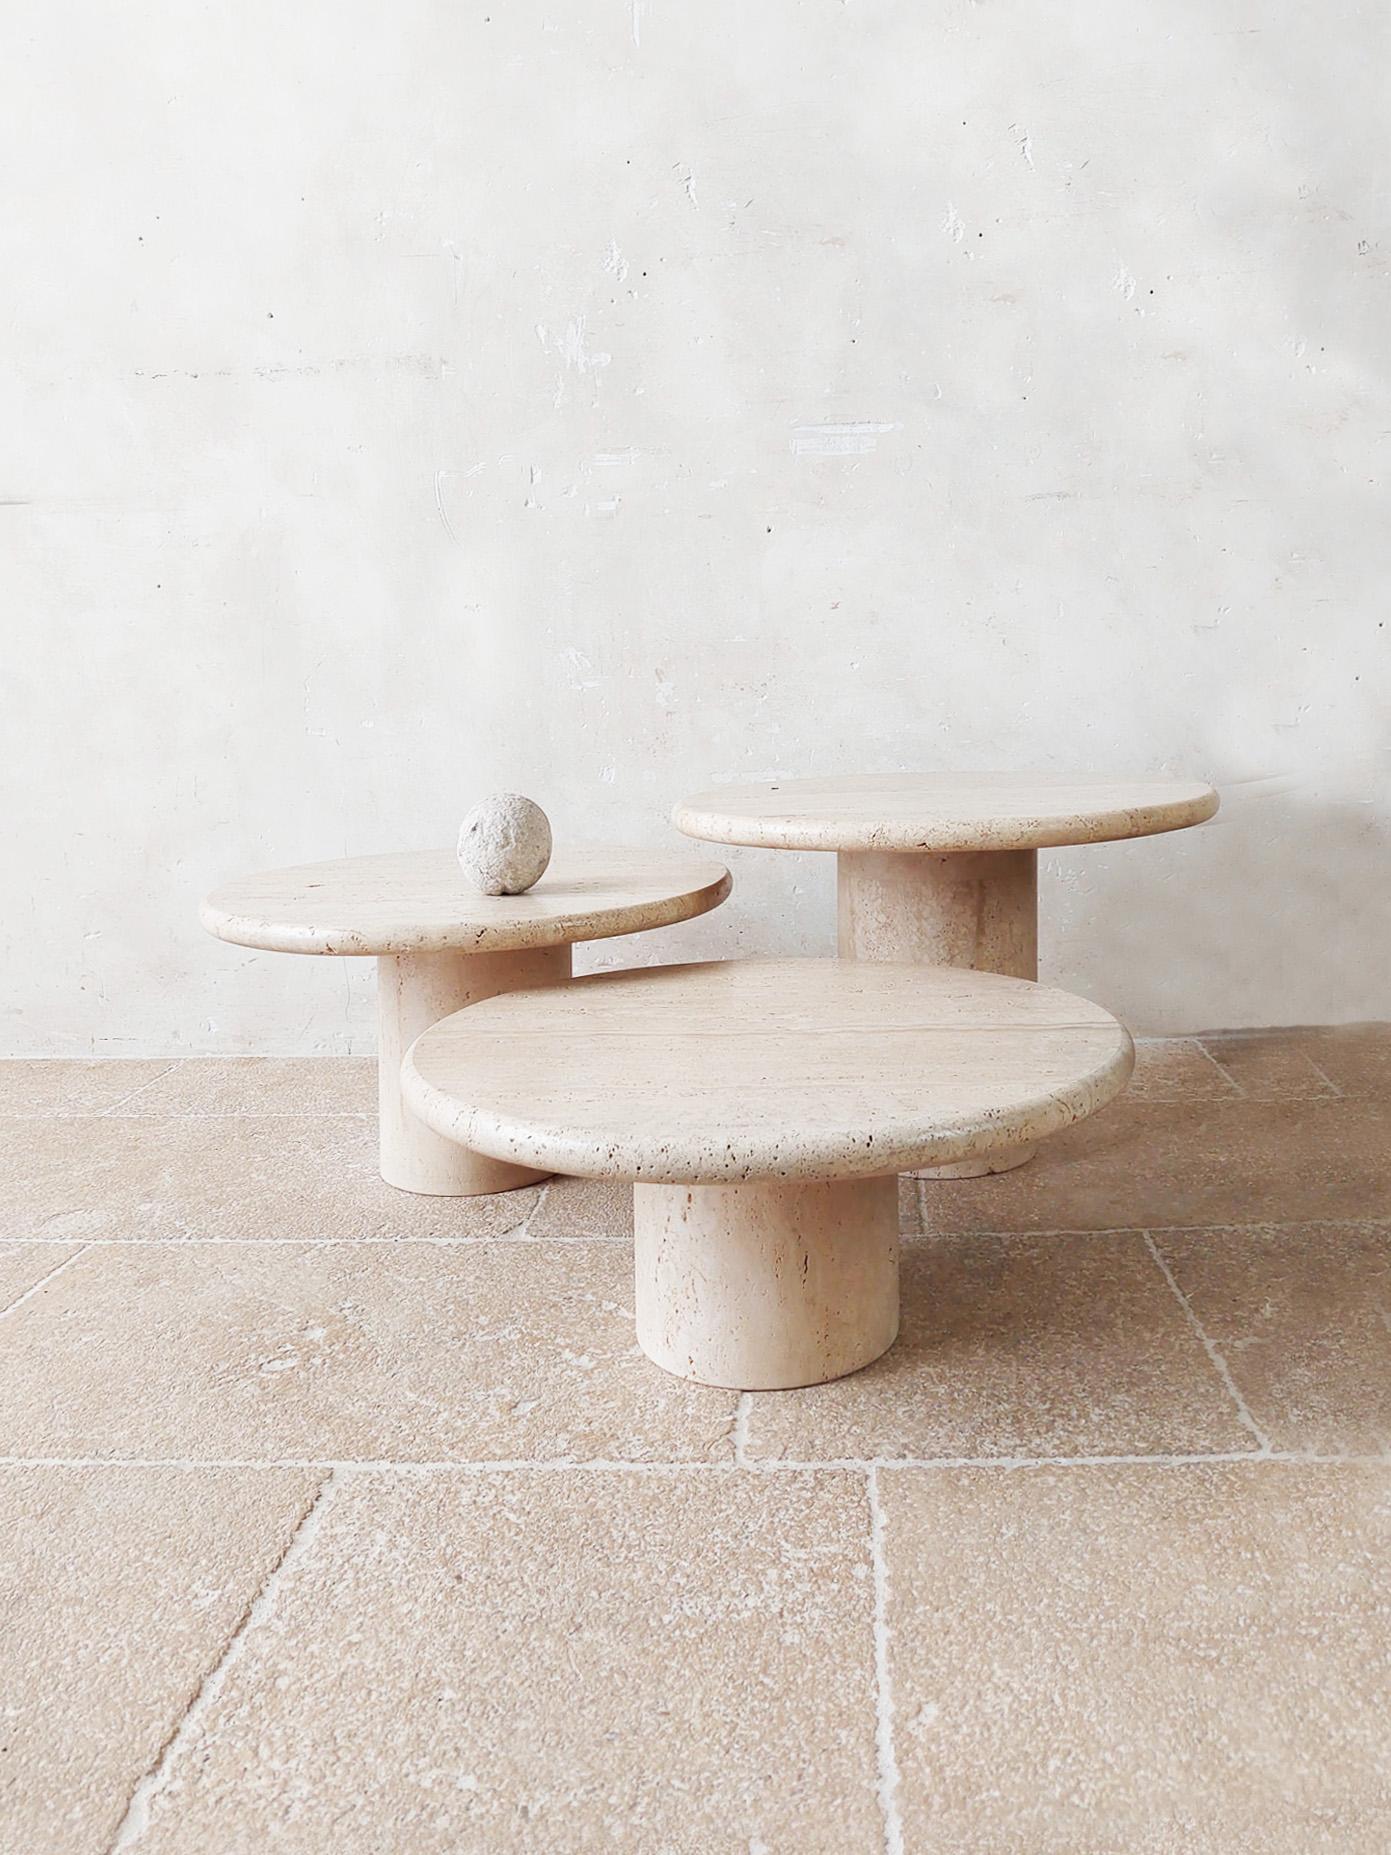 Set of three vintage Italian round travertine coffee tables, 1970s. Beautiful set of cocktail tables in three different heights with a round base and a round top made of travertine.

The top rests firmly on the foot (by means of a round travertine